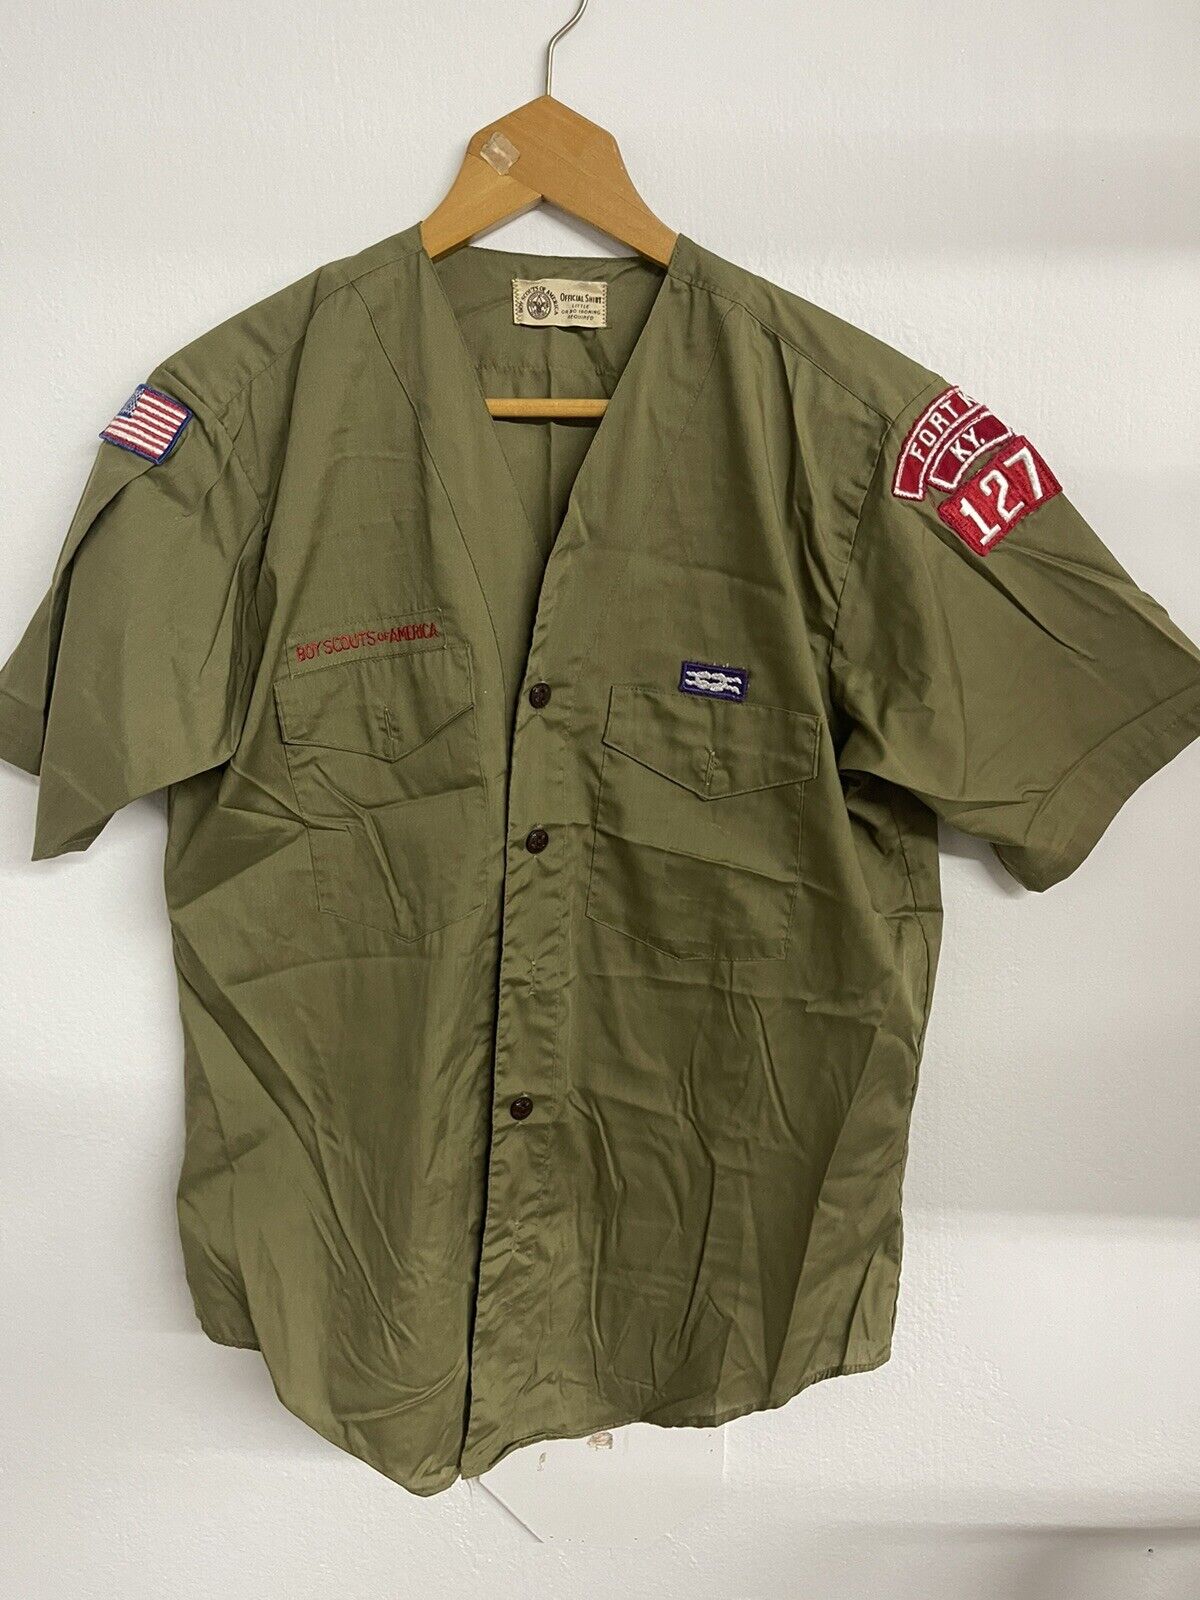 Vintage Boy Scouts Of America BSA Khaki Green Shirt w/ Patches 70s Fort Knox 127